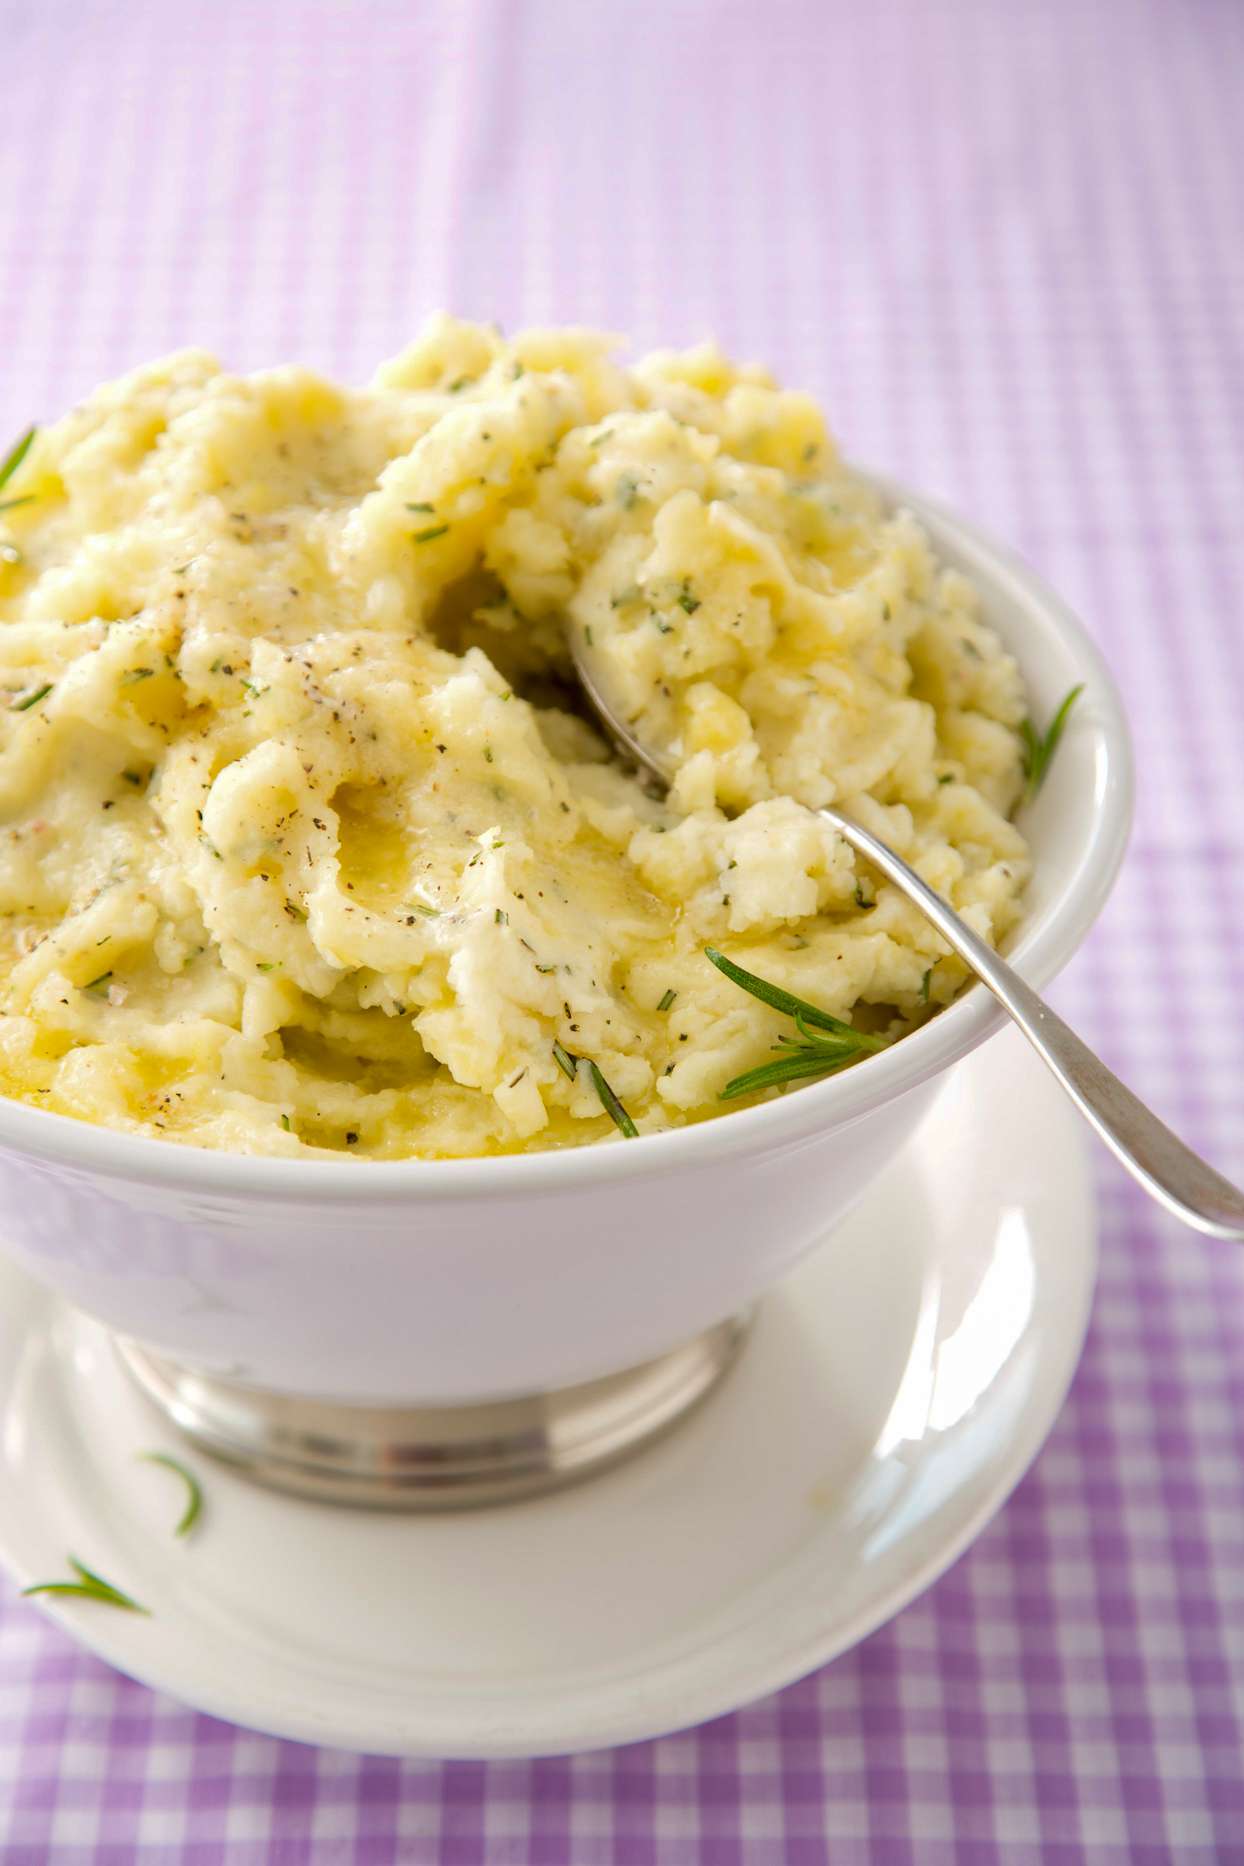 Make Mashed Potatoes in Three Easy Steps